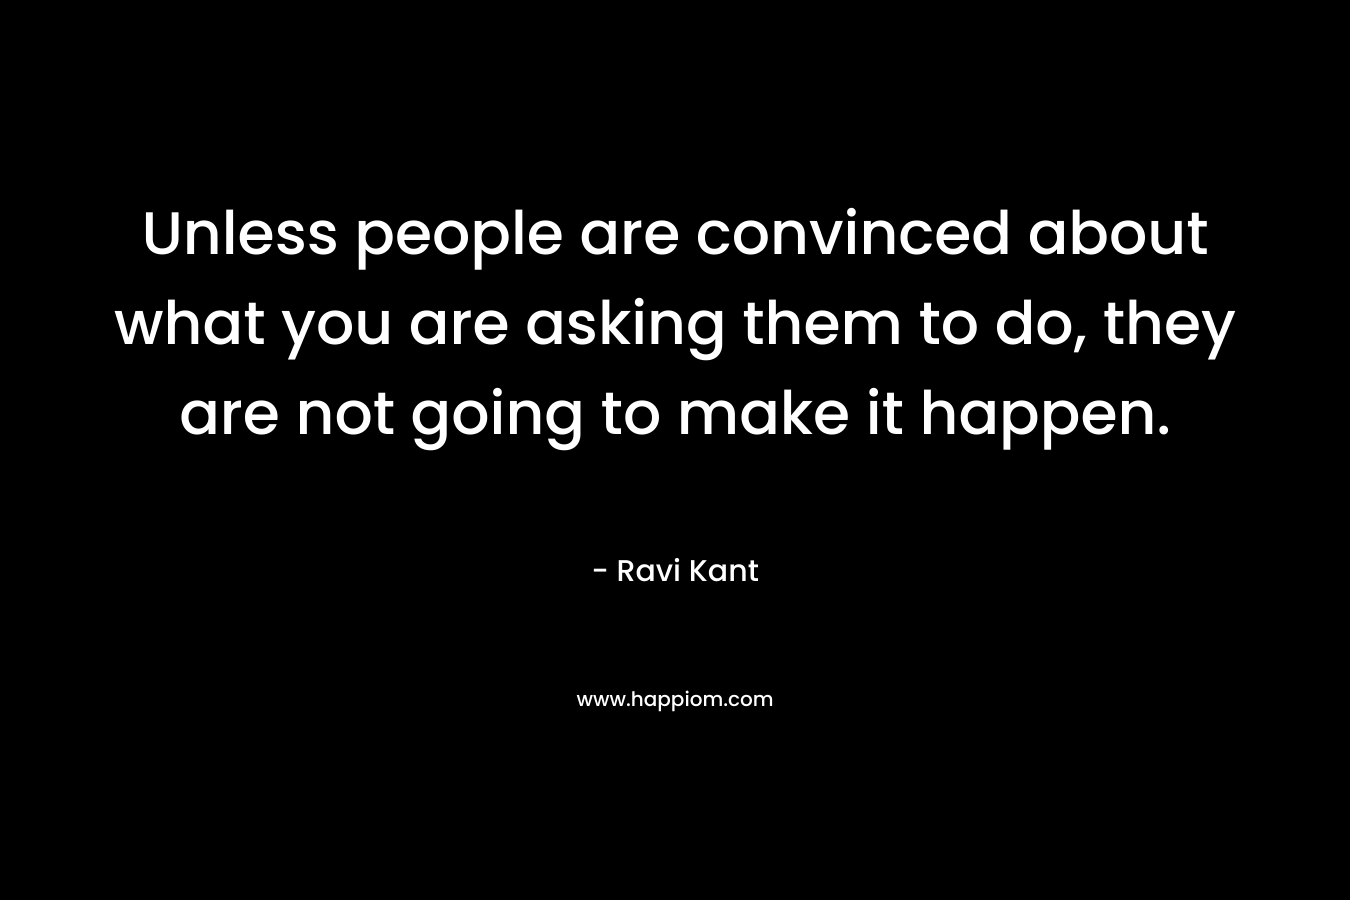 Unless people are convinced about what you are asking them to do, they are not going to make it happen. – Ravi Kant